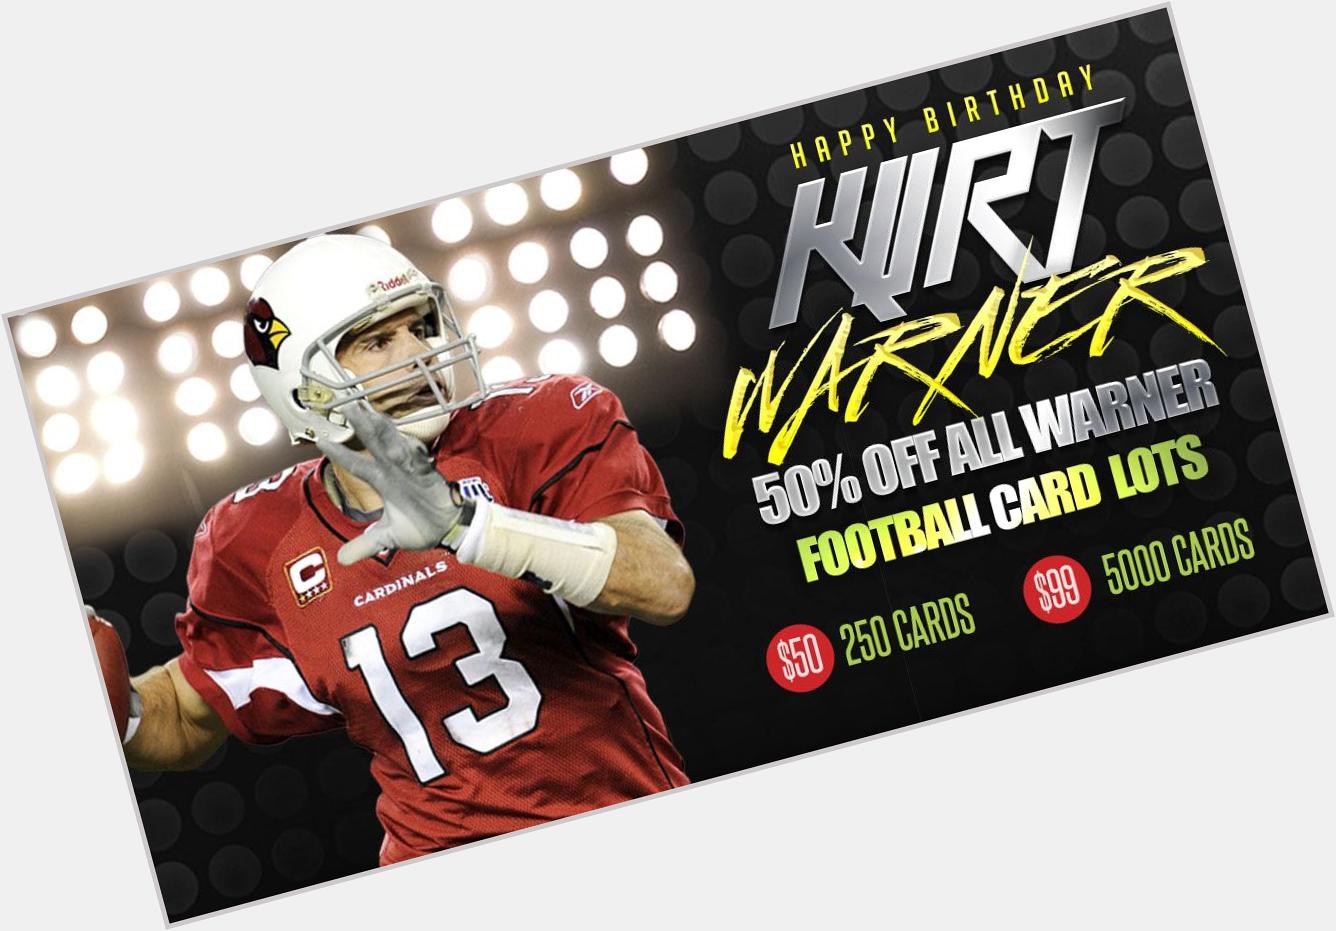 HAPPY BIRTHDAY TO KUWARNER!! TAKE 50% OFF ALL FOOTBALL CARD WHOLESALE LOTS!   